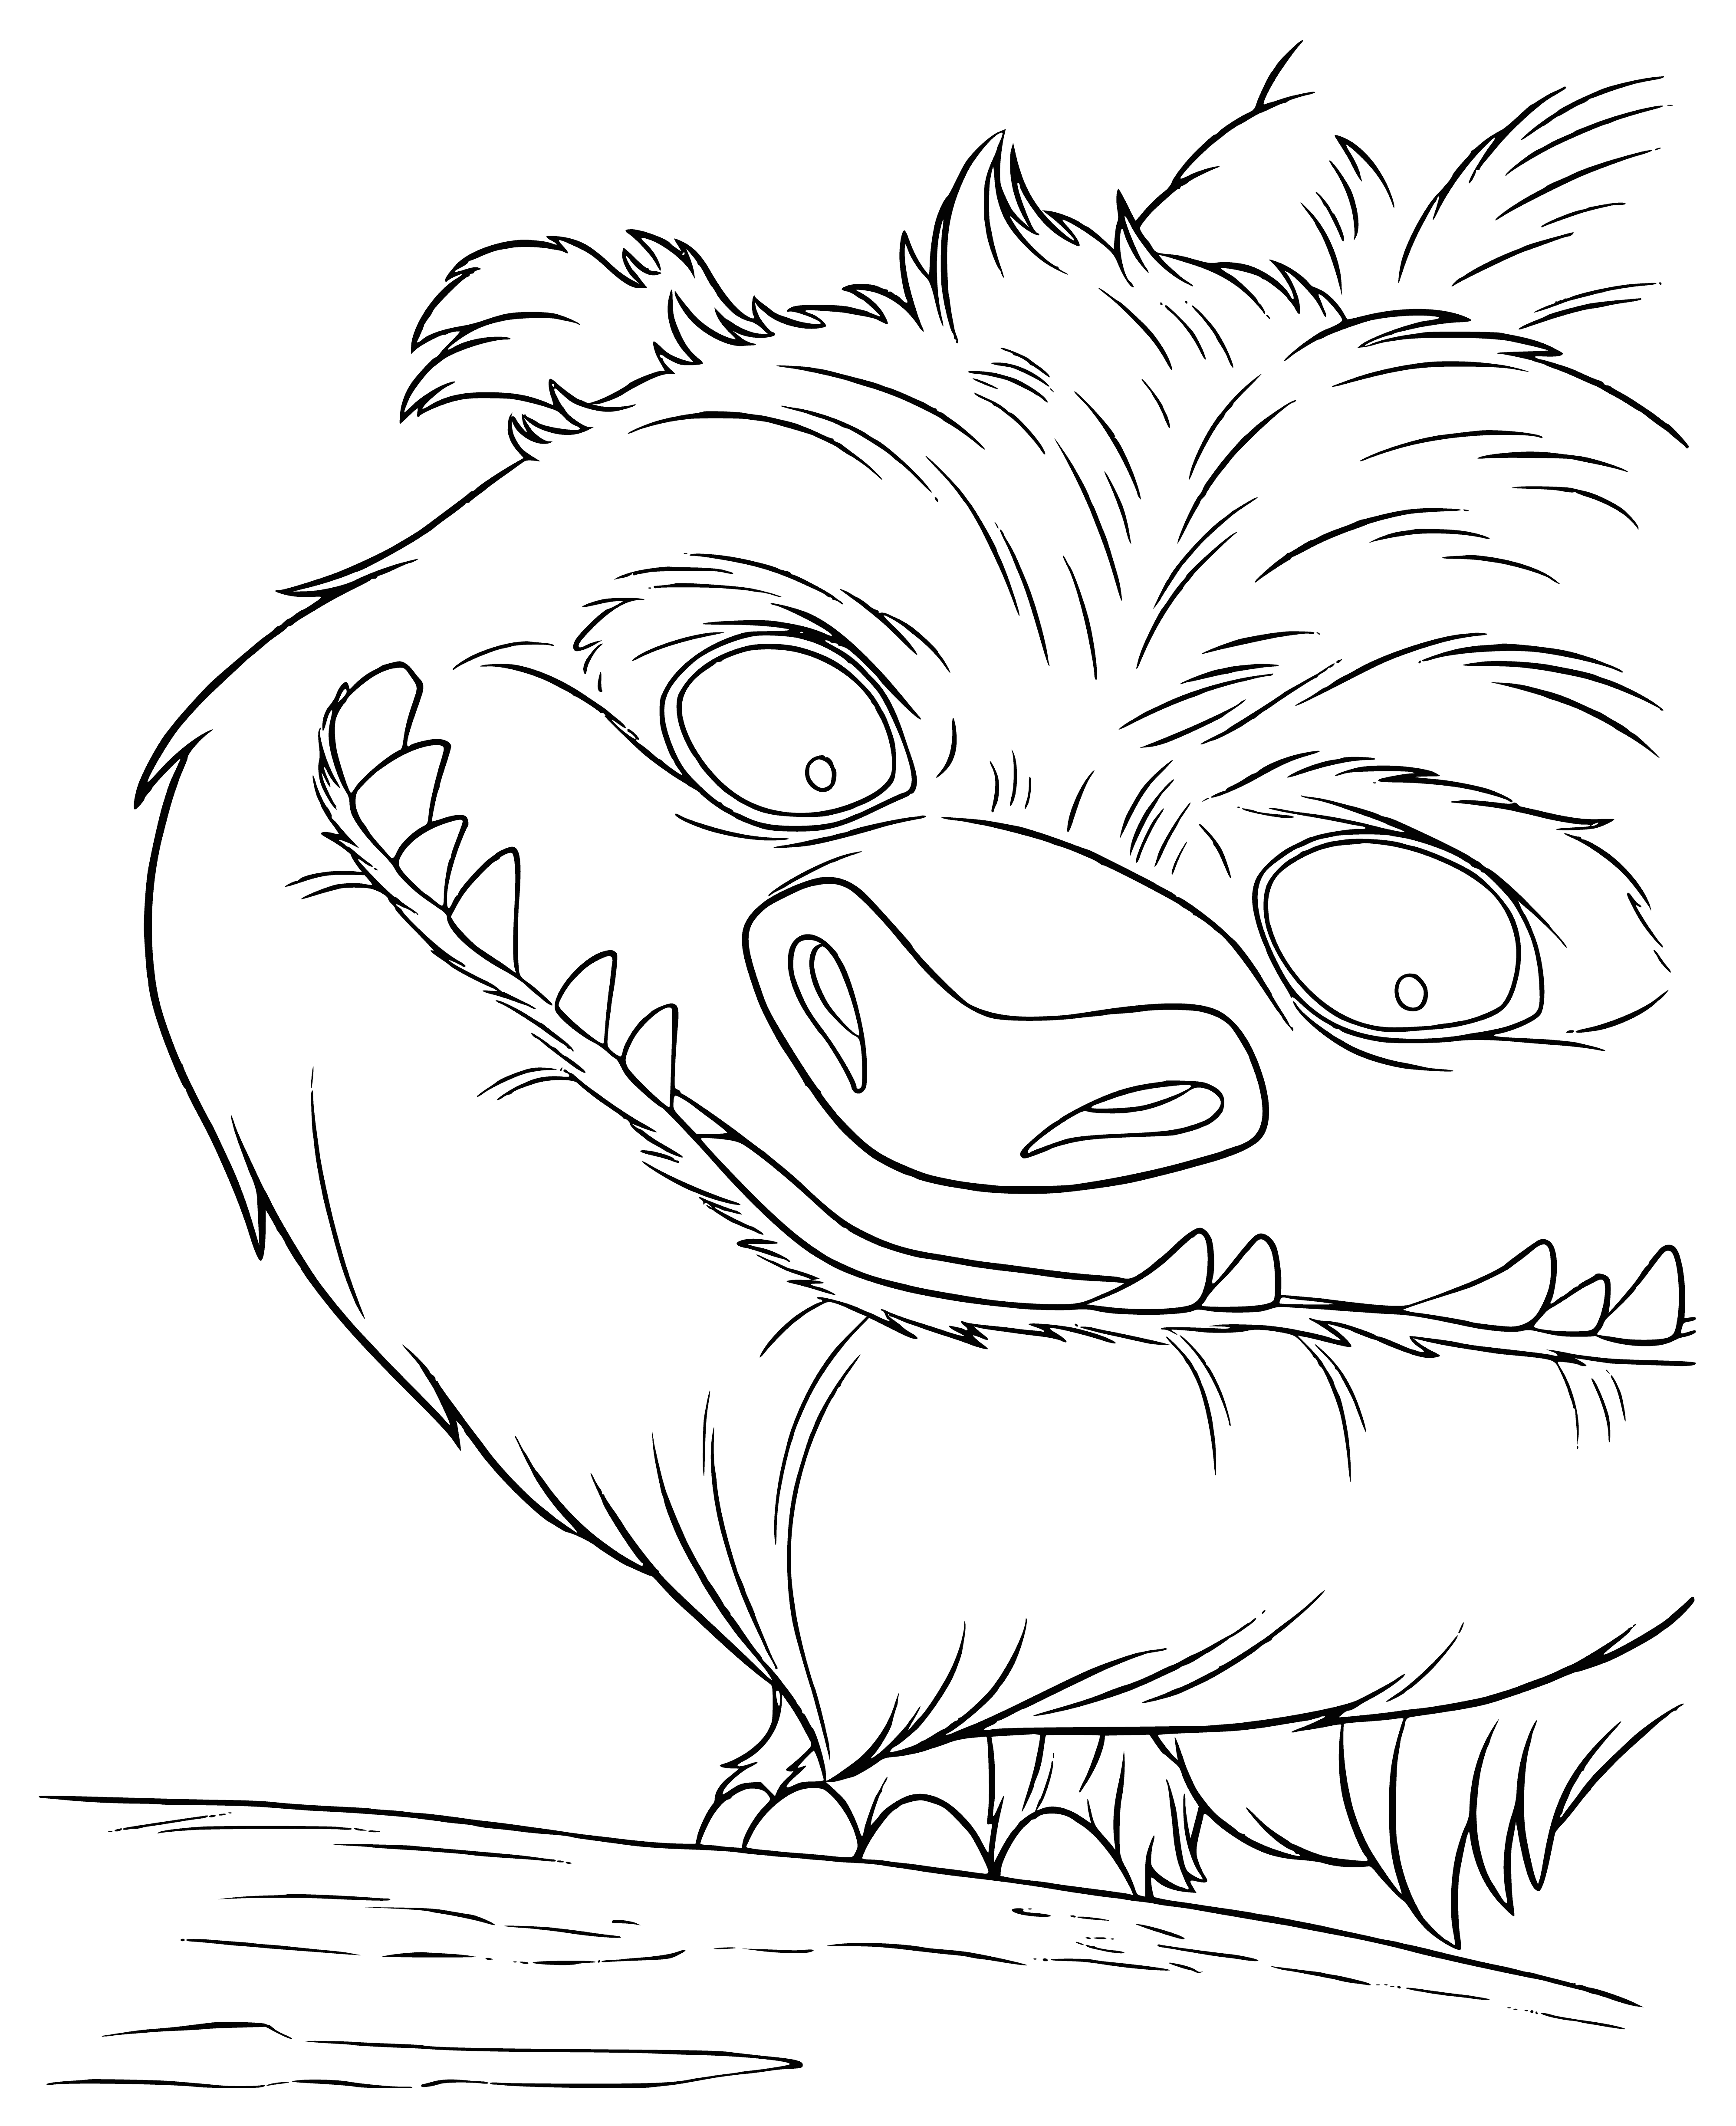 A monster coloring page